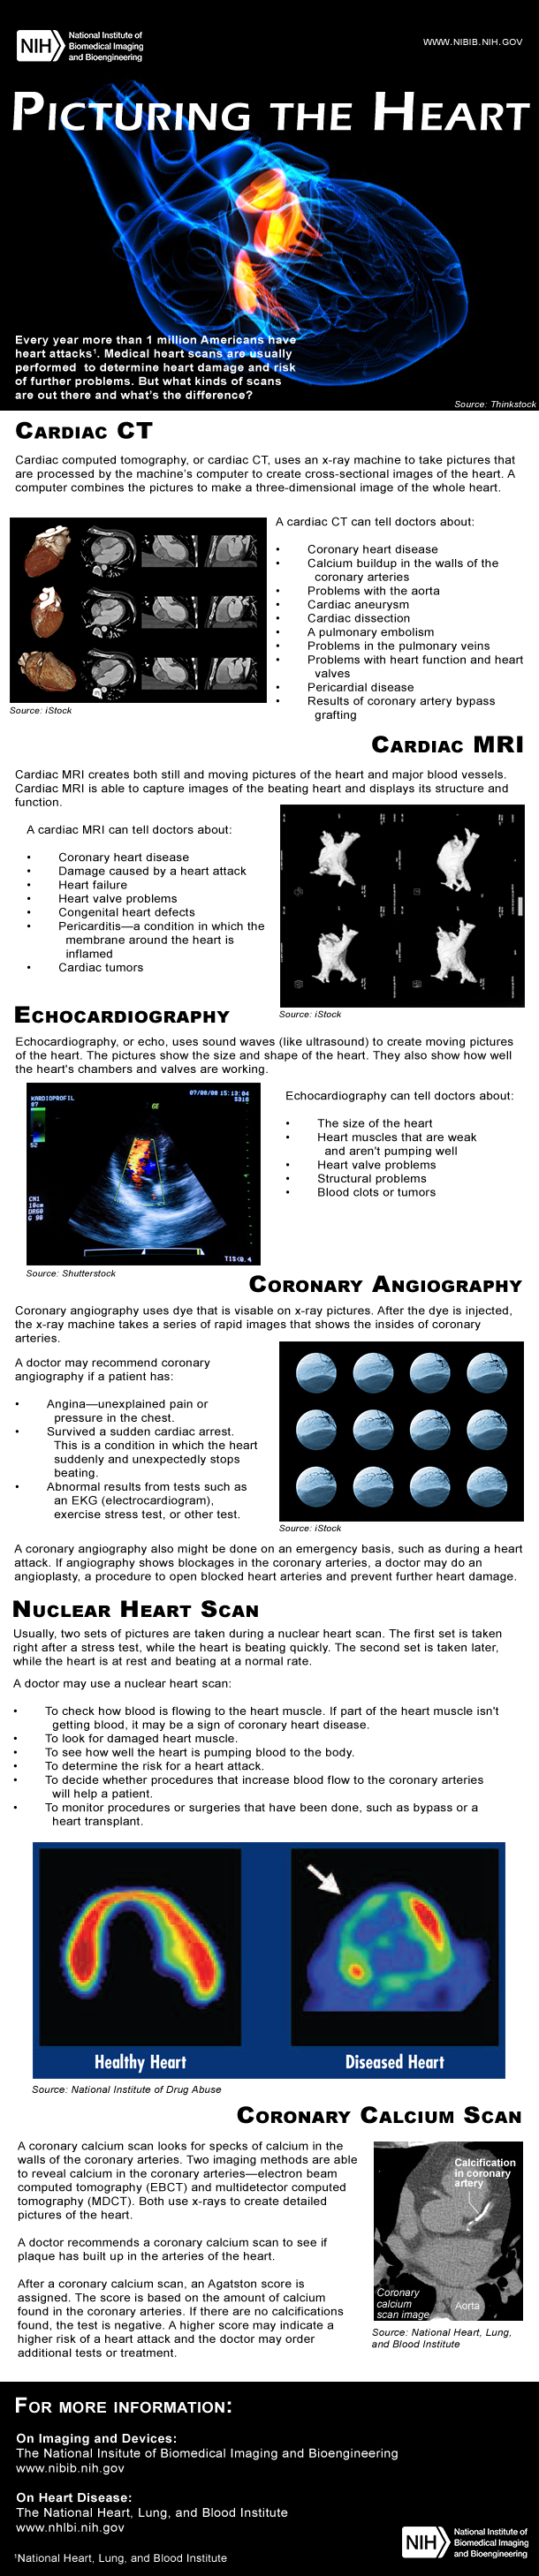 Image graphic with images and explanations of cardiac CT, cardiac MRI, echocardiography, coronary angiography, nuclear heart scan, and coronary calcium scan